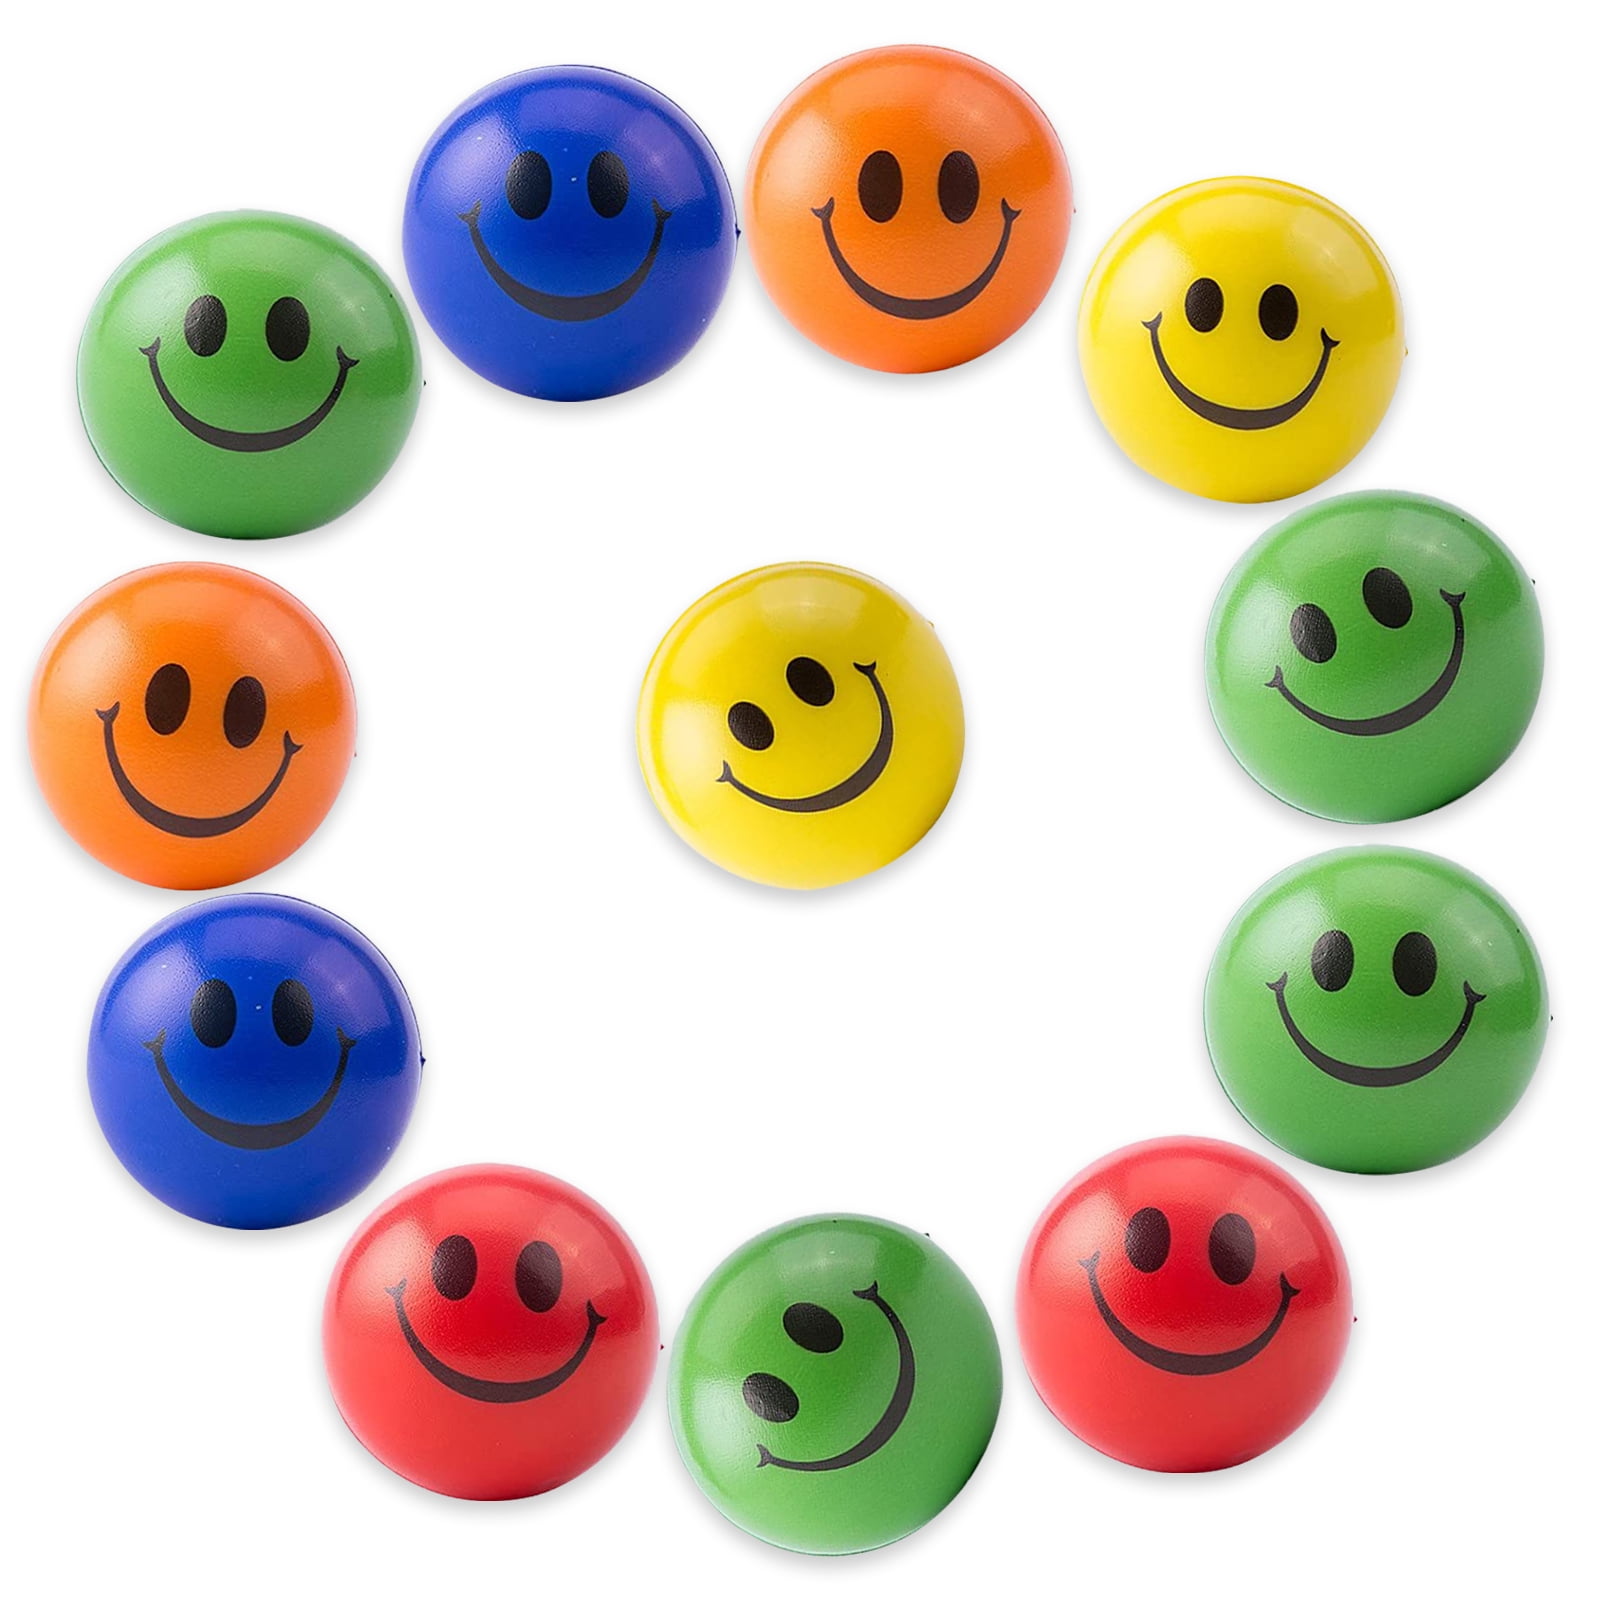 36 SMILE SMILEY FACE STRESS RELIEF BALLS 2" FOAM HAND THERAPY SQUEEZE TOY BALL 